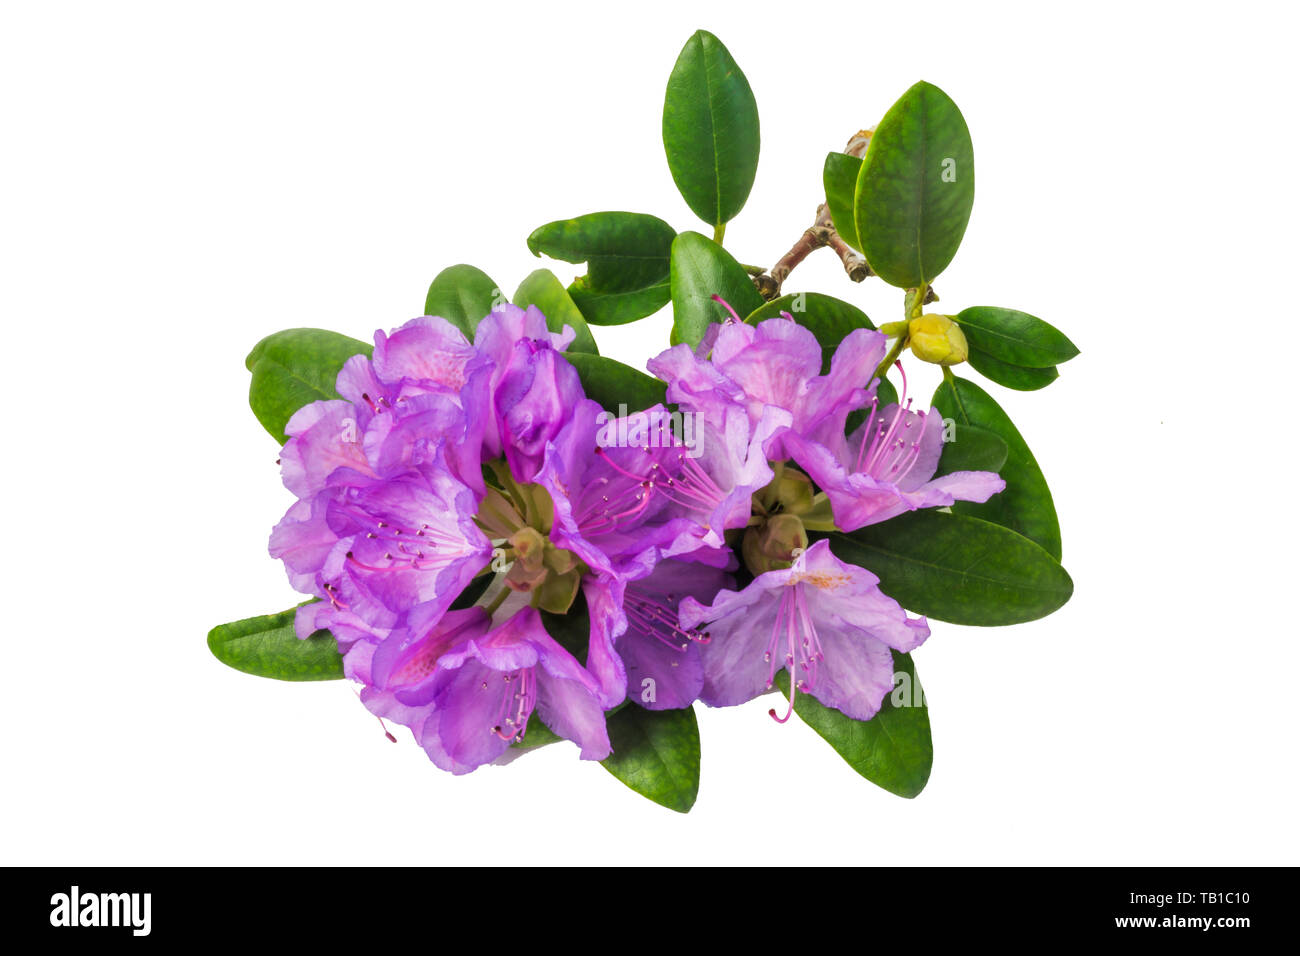 Rhododendron purple flowers isolated on white background. Stock Photo